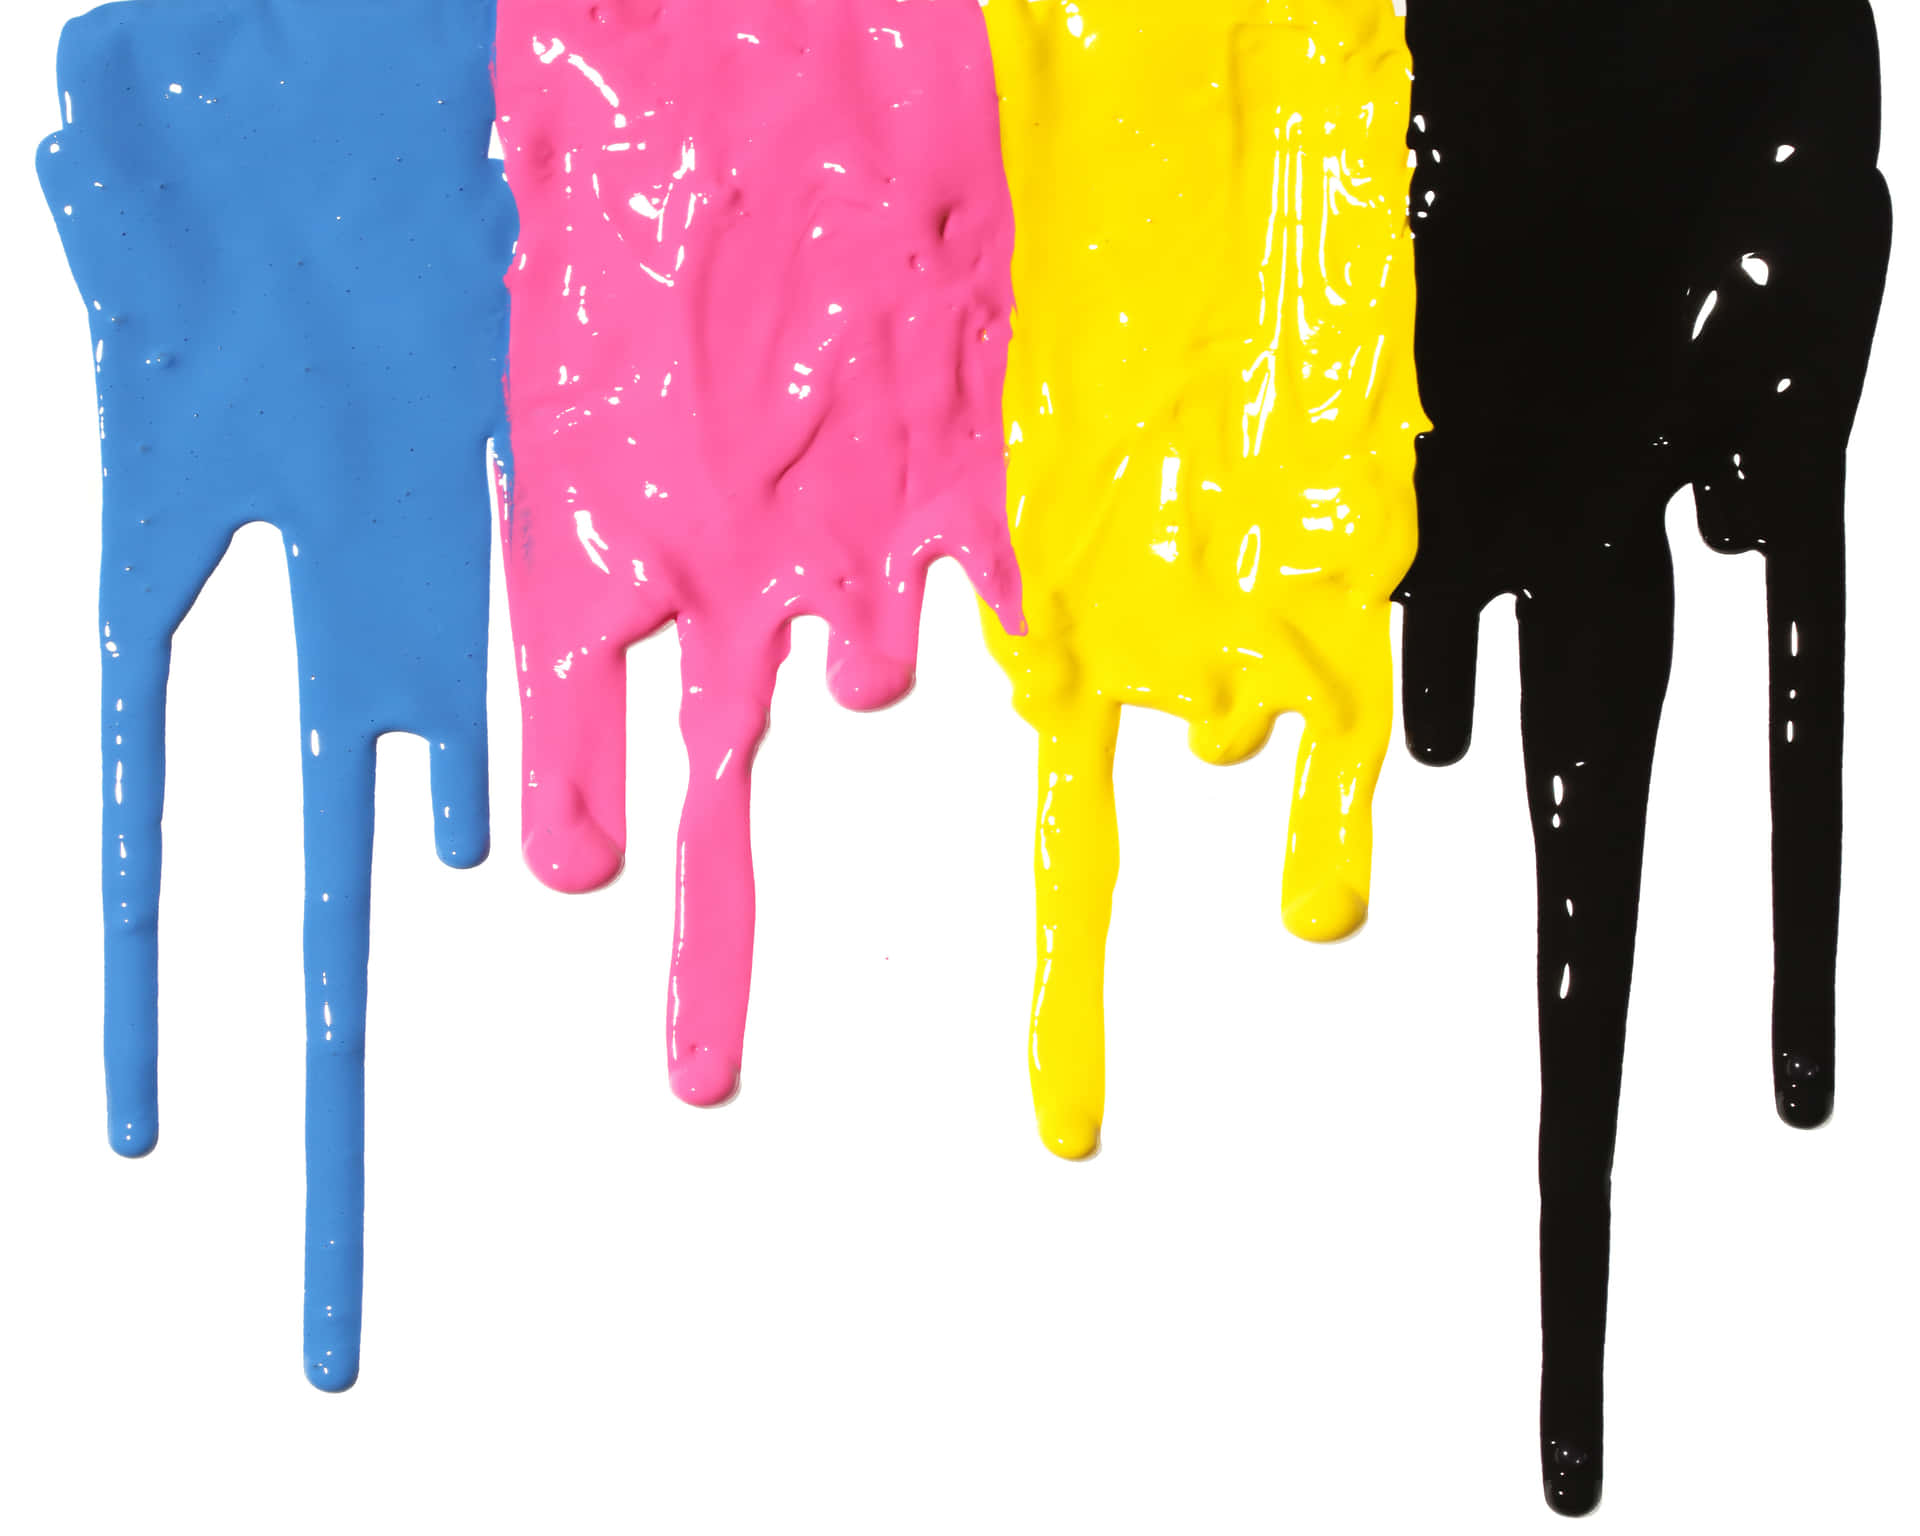 Artwork made with colorful drip paint HD wallpaper 4k background